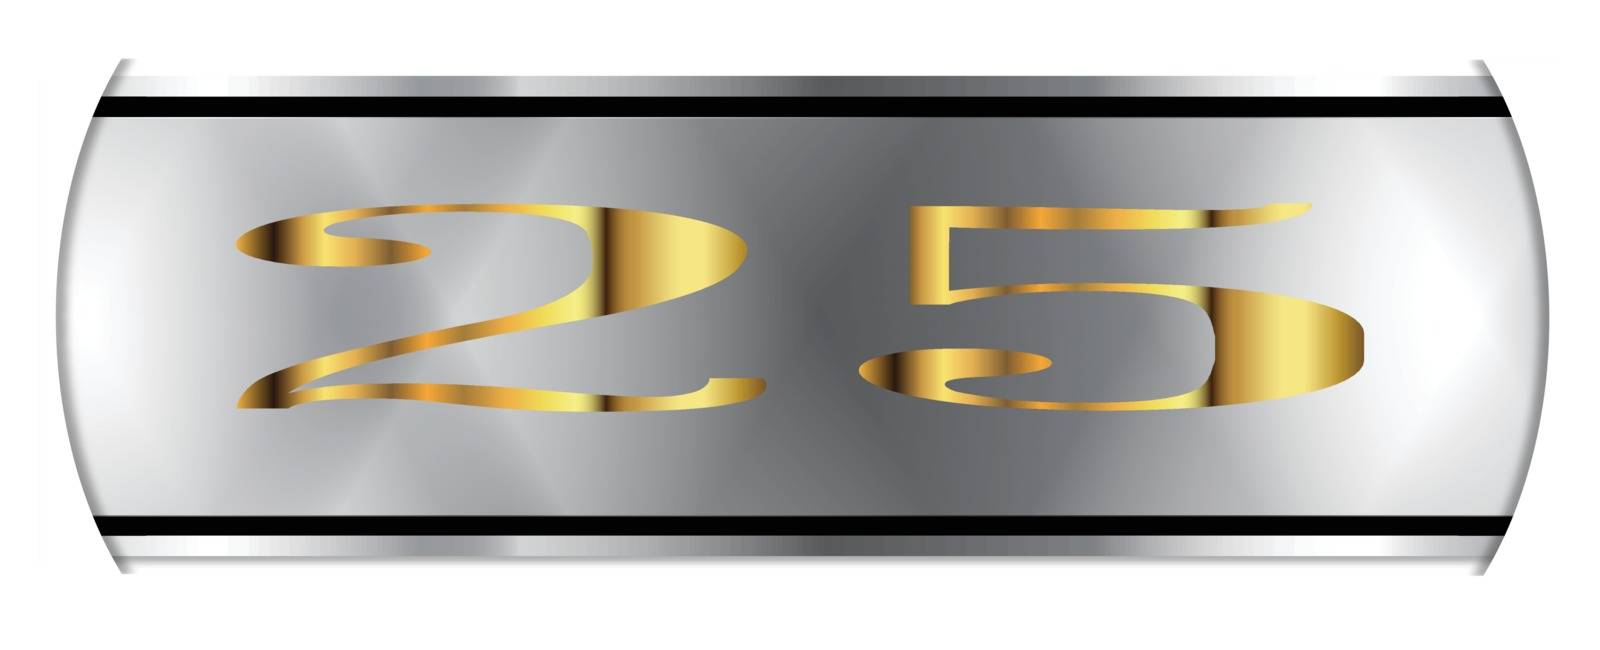 A silver and gold 25 banner over white